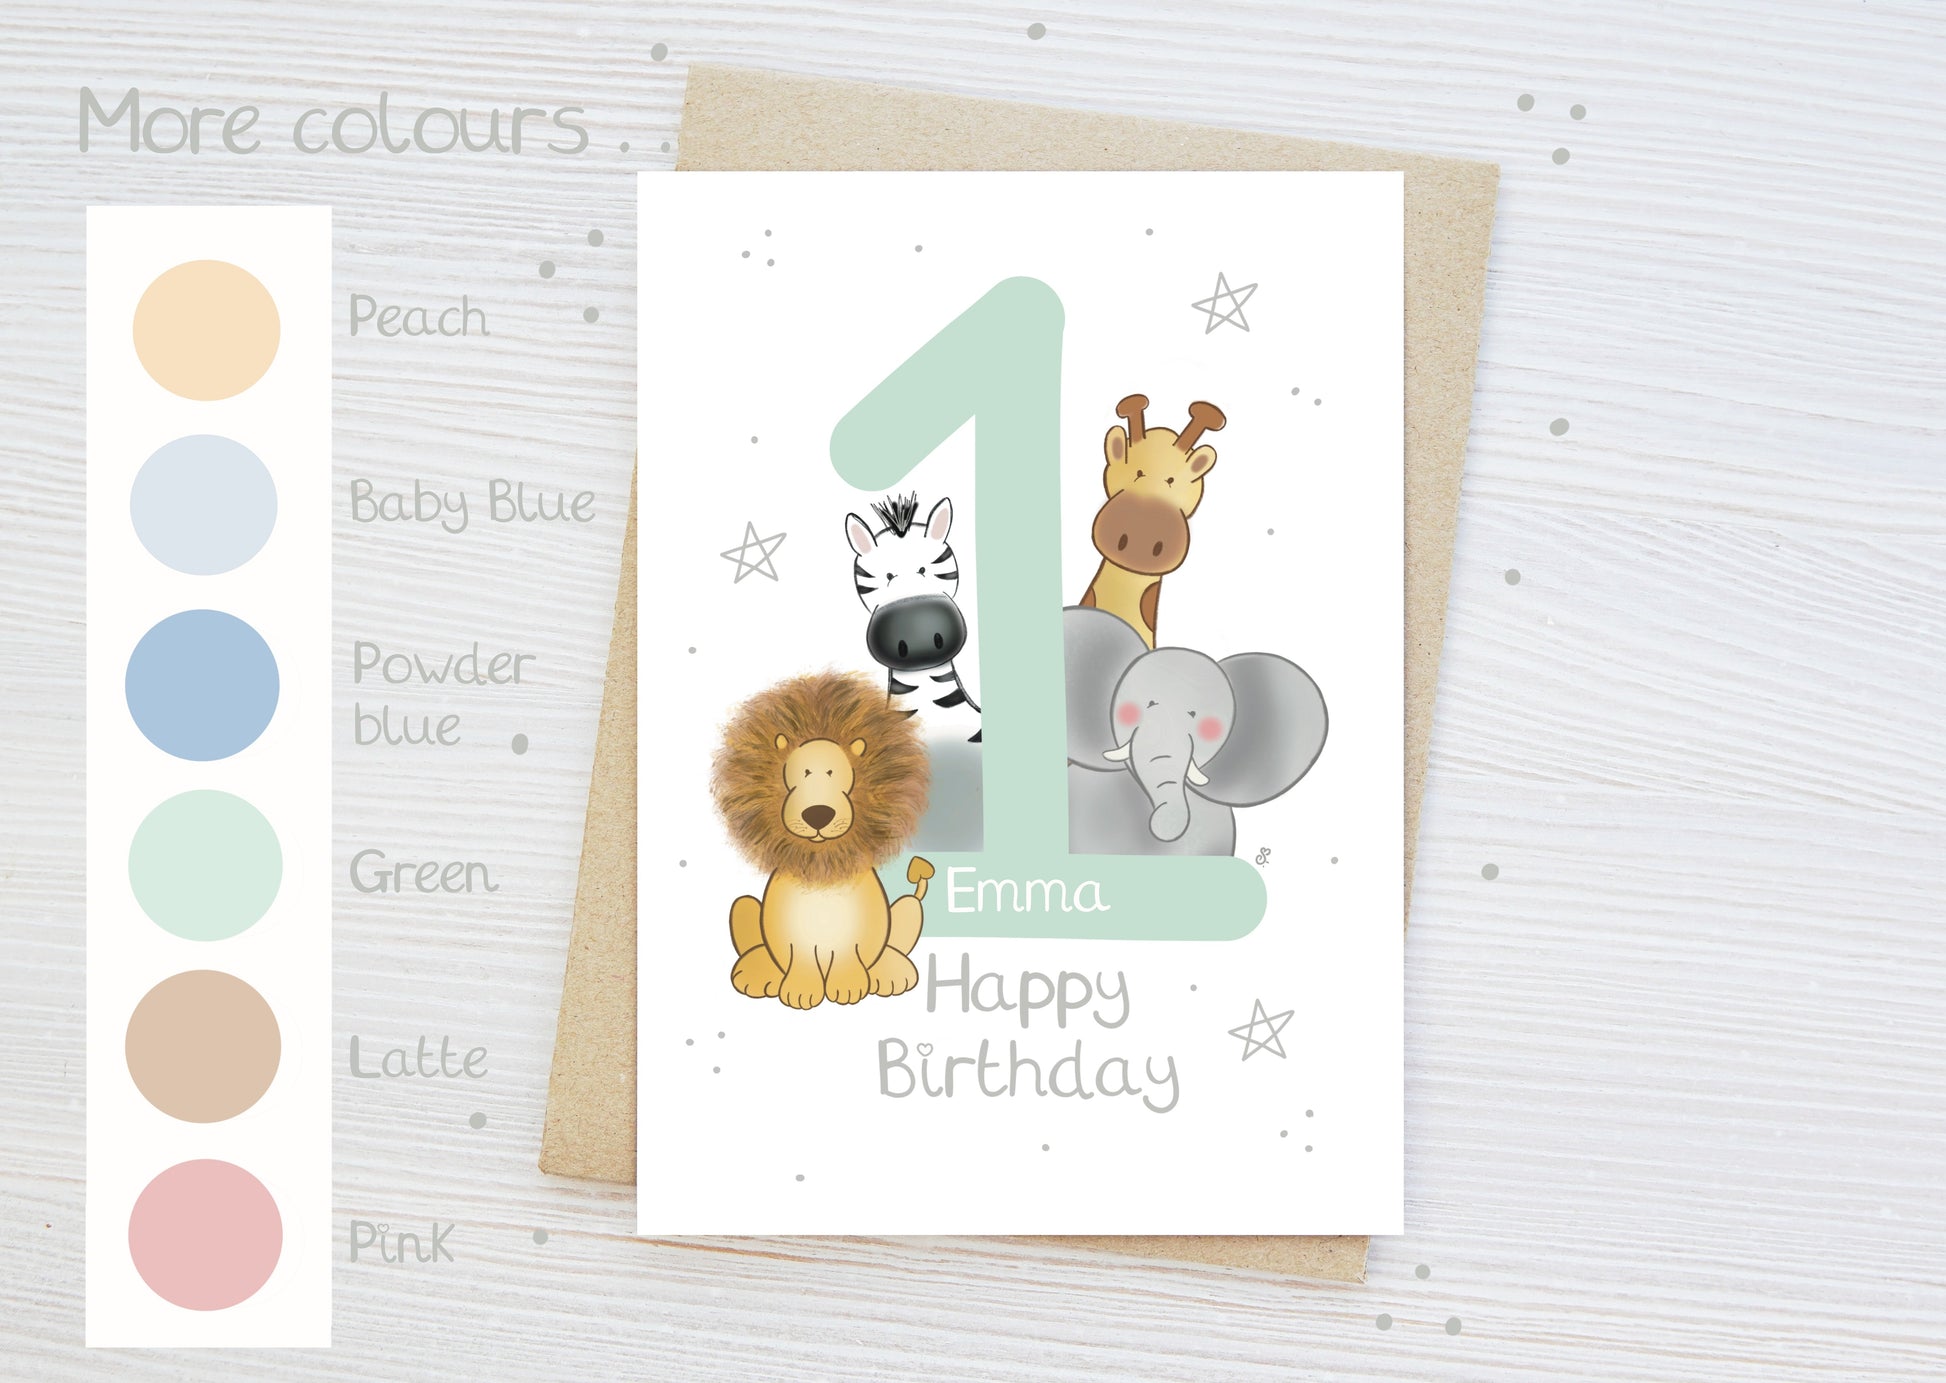 colour options for luxury children's milestone birthday card with safari animal theme stars and happy birthday text with personalised name